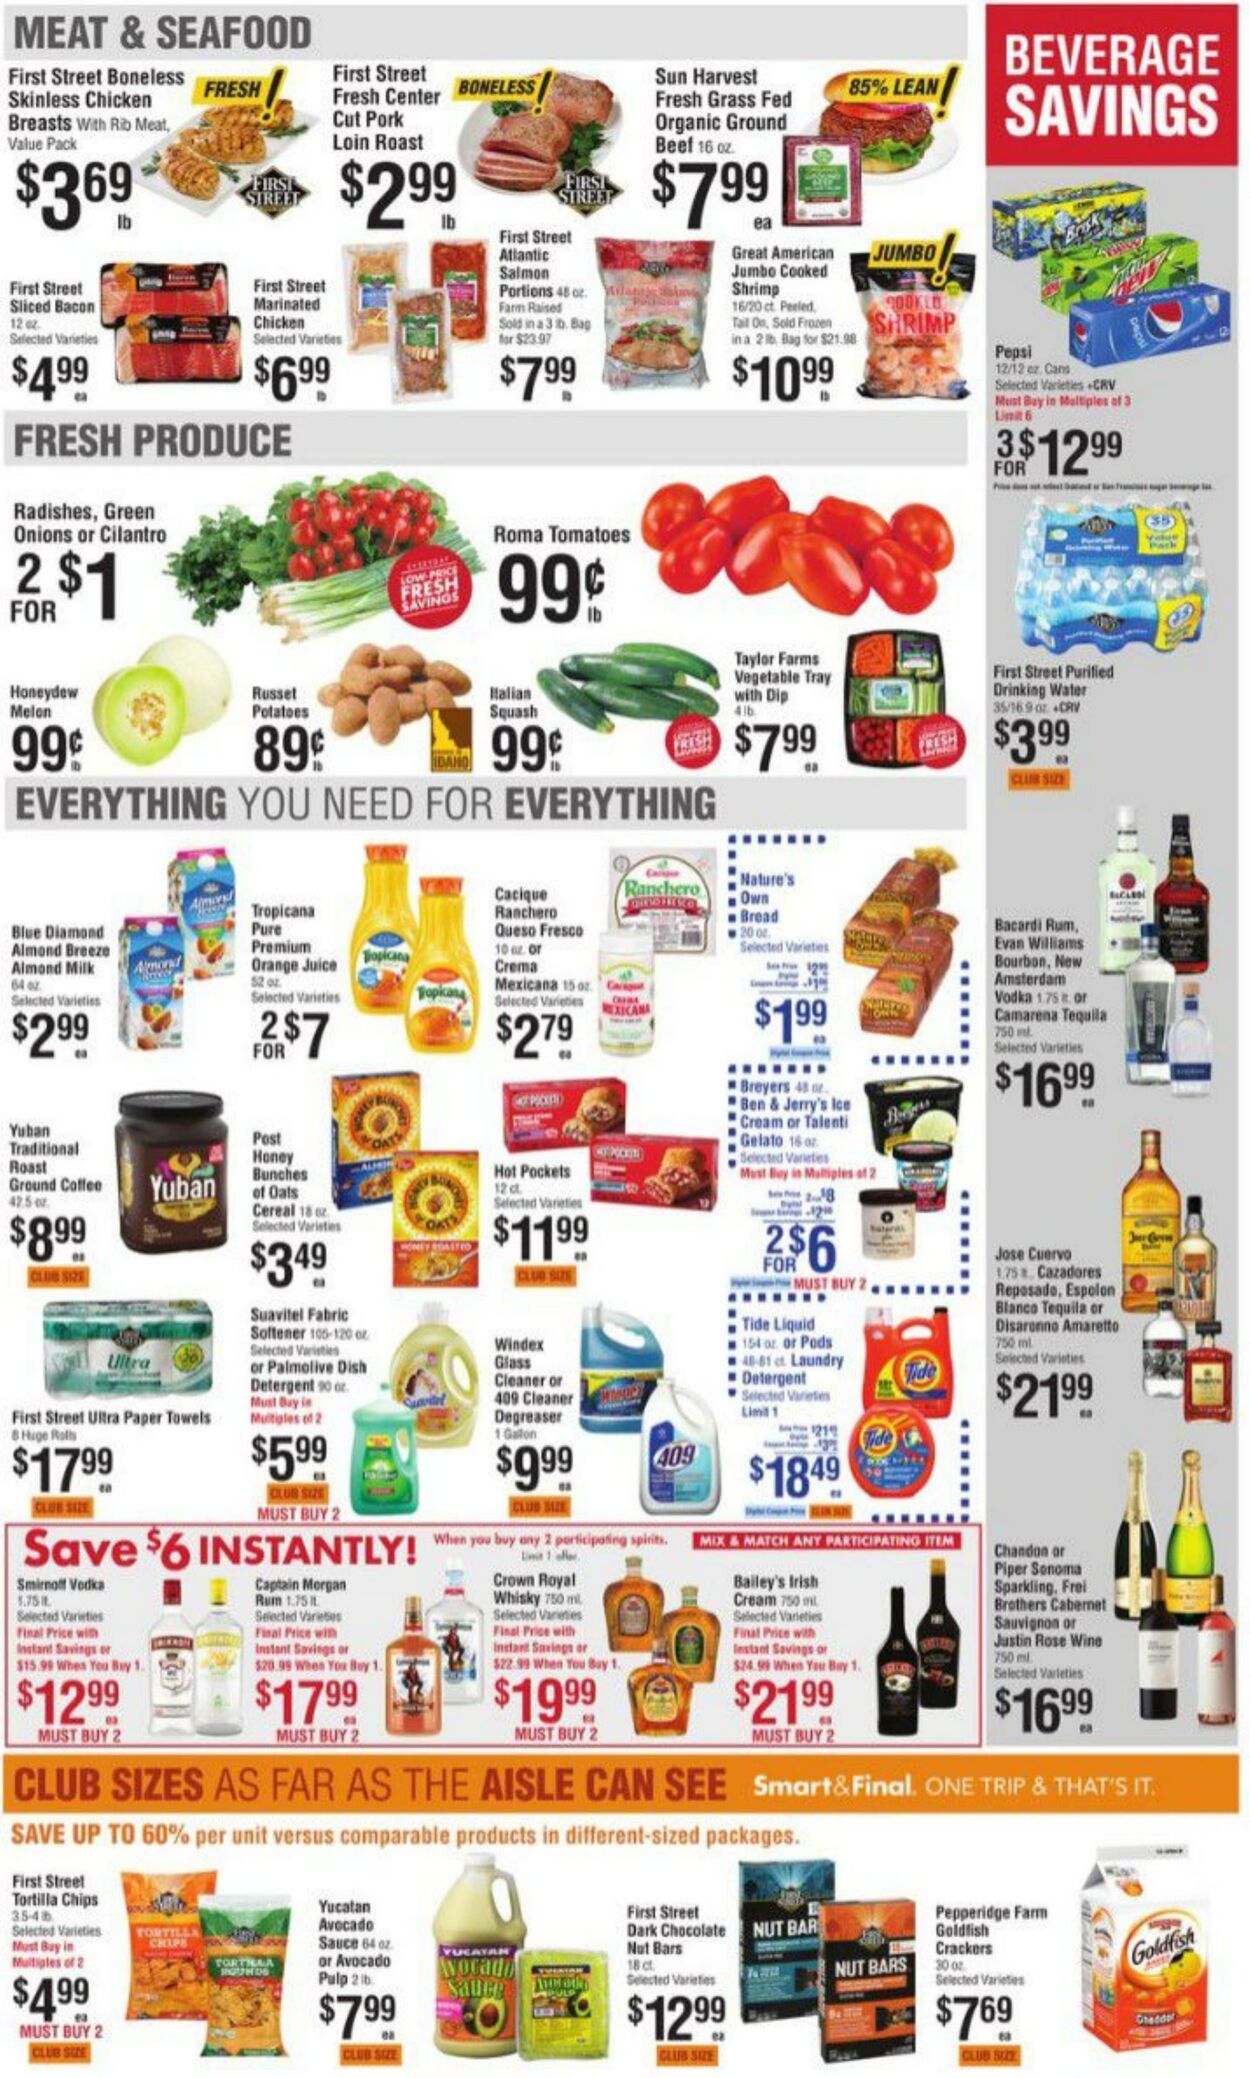 Weekly ad Smart and Final 05/04/2022 - 05/10/2022